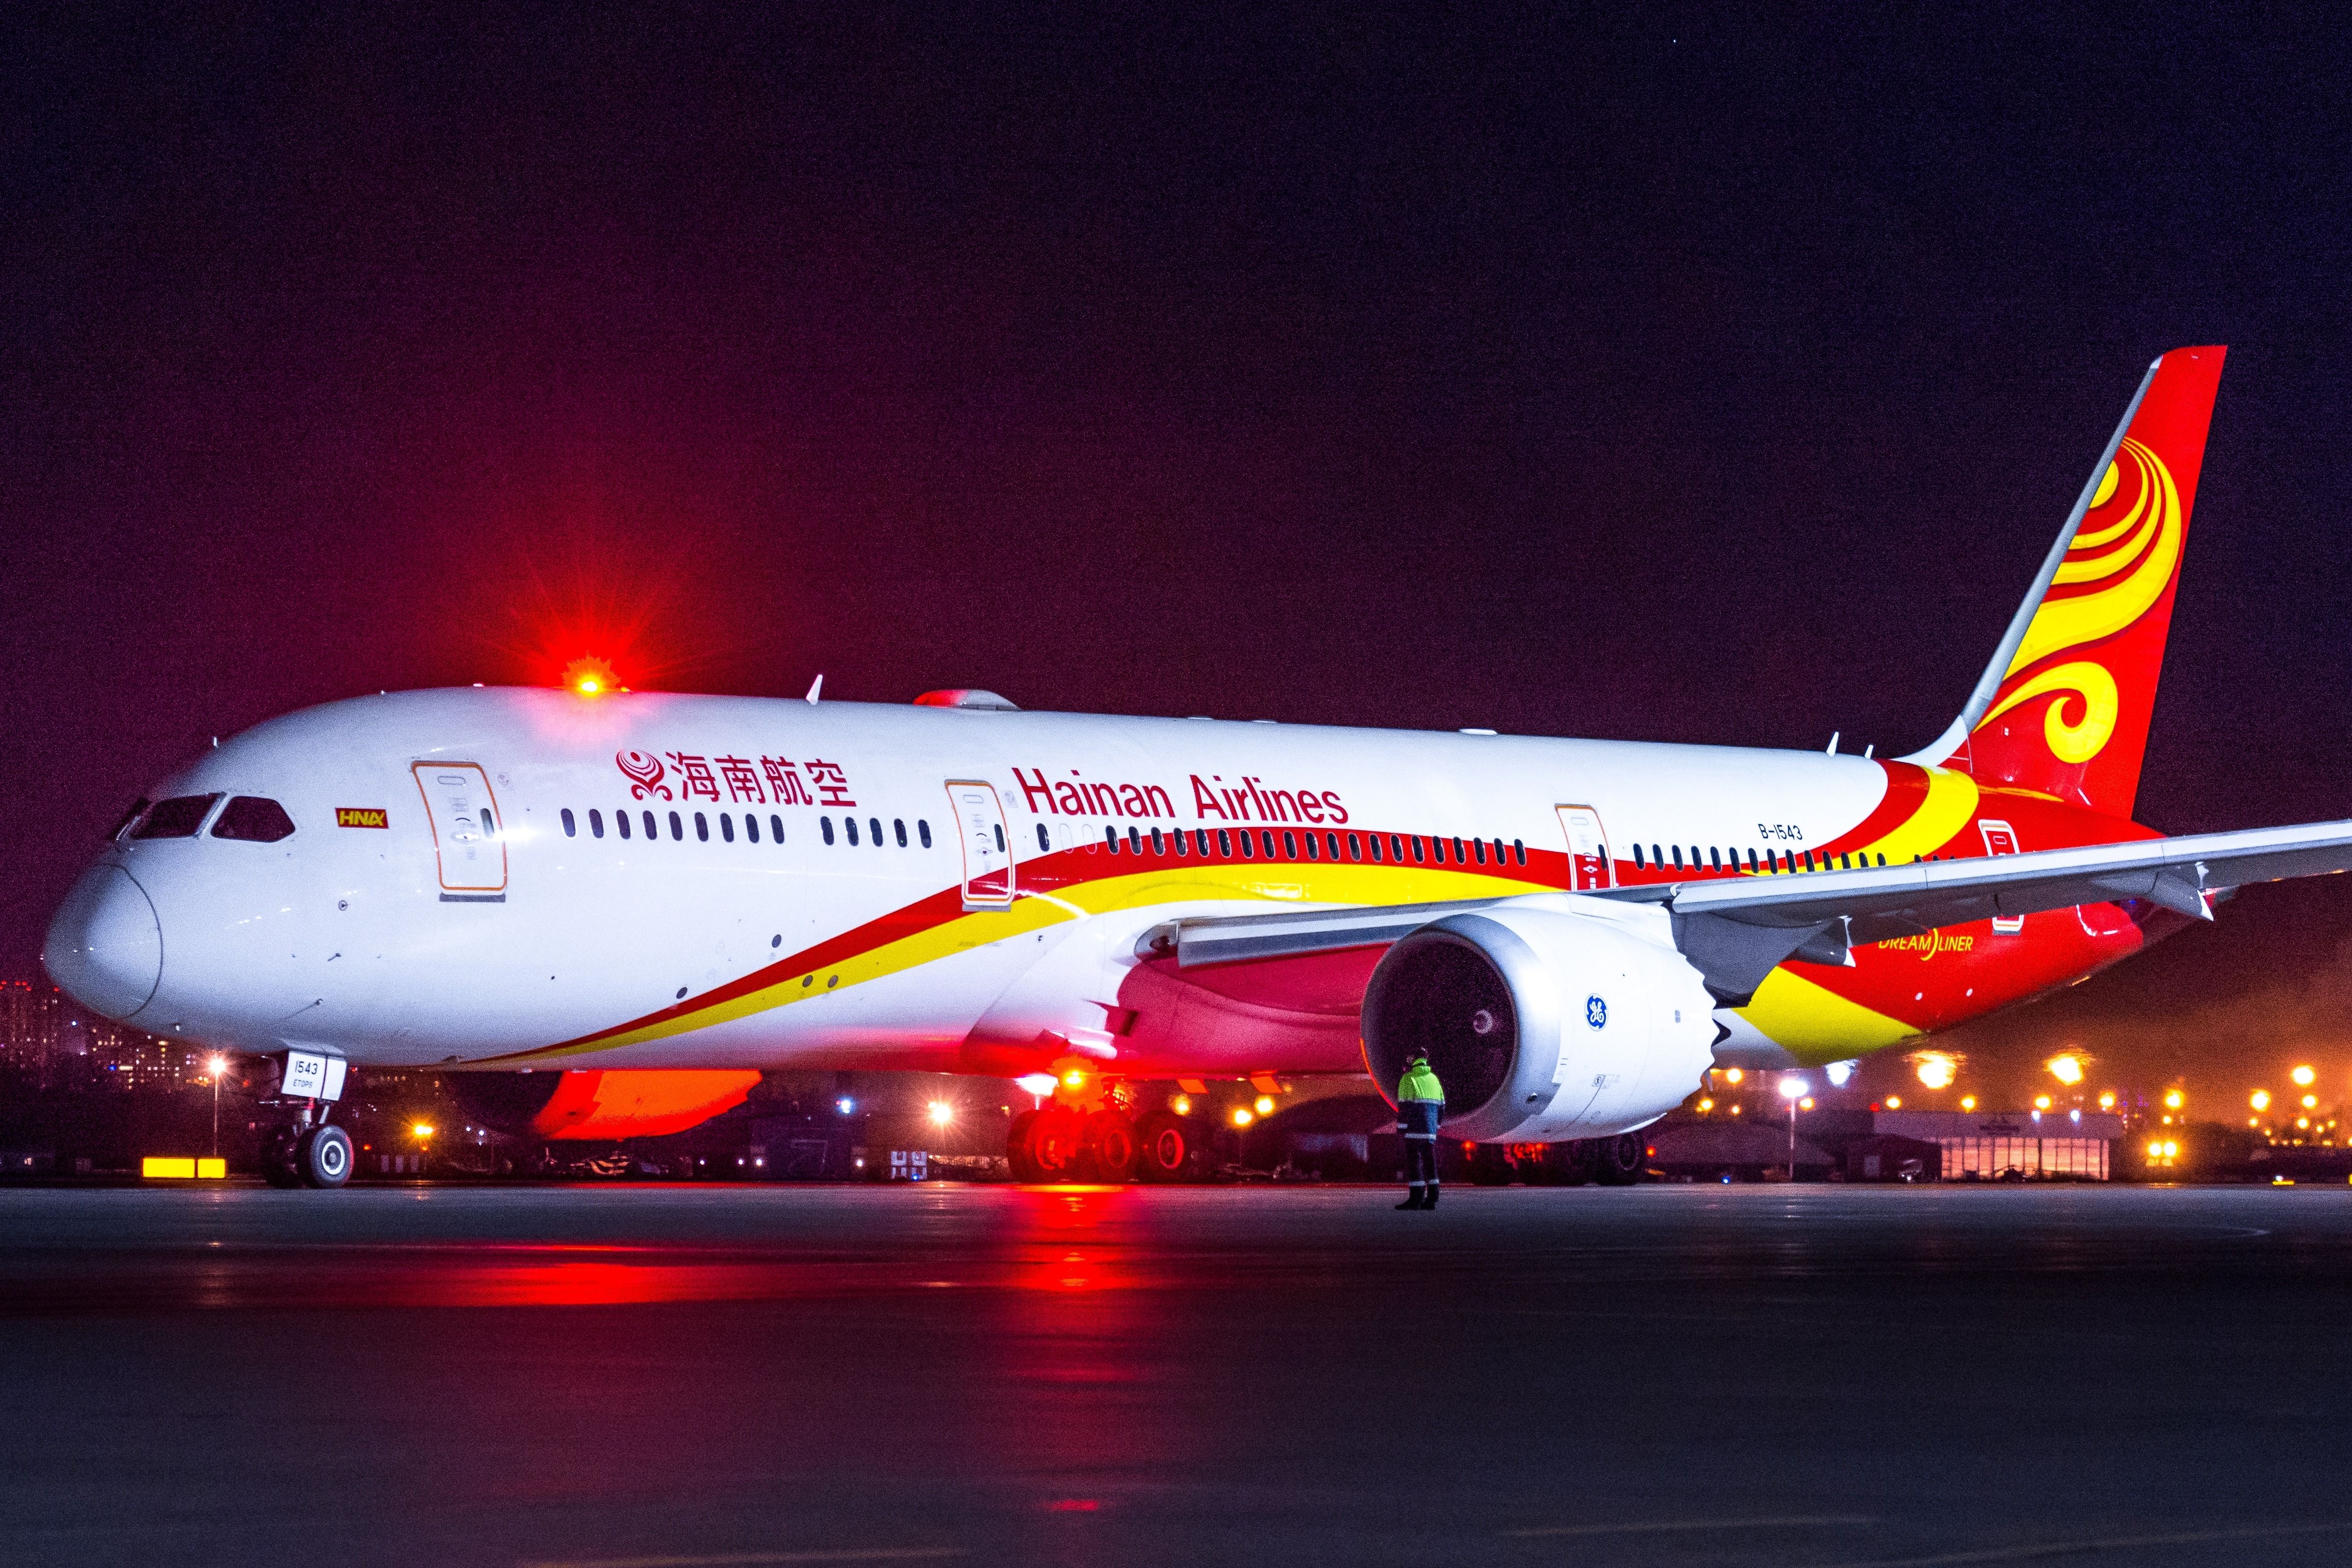 A Hainan Airlines Boeing 787 Dreamliner parked at an airport